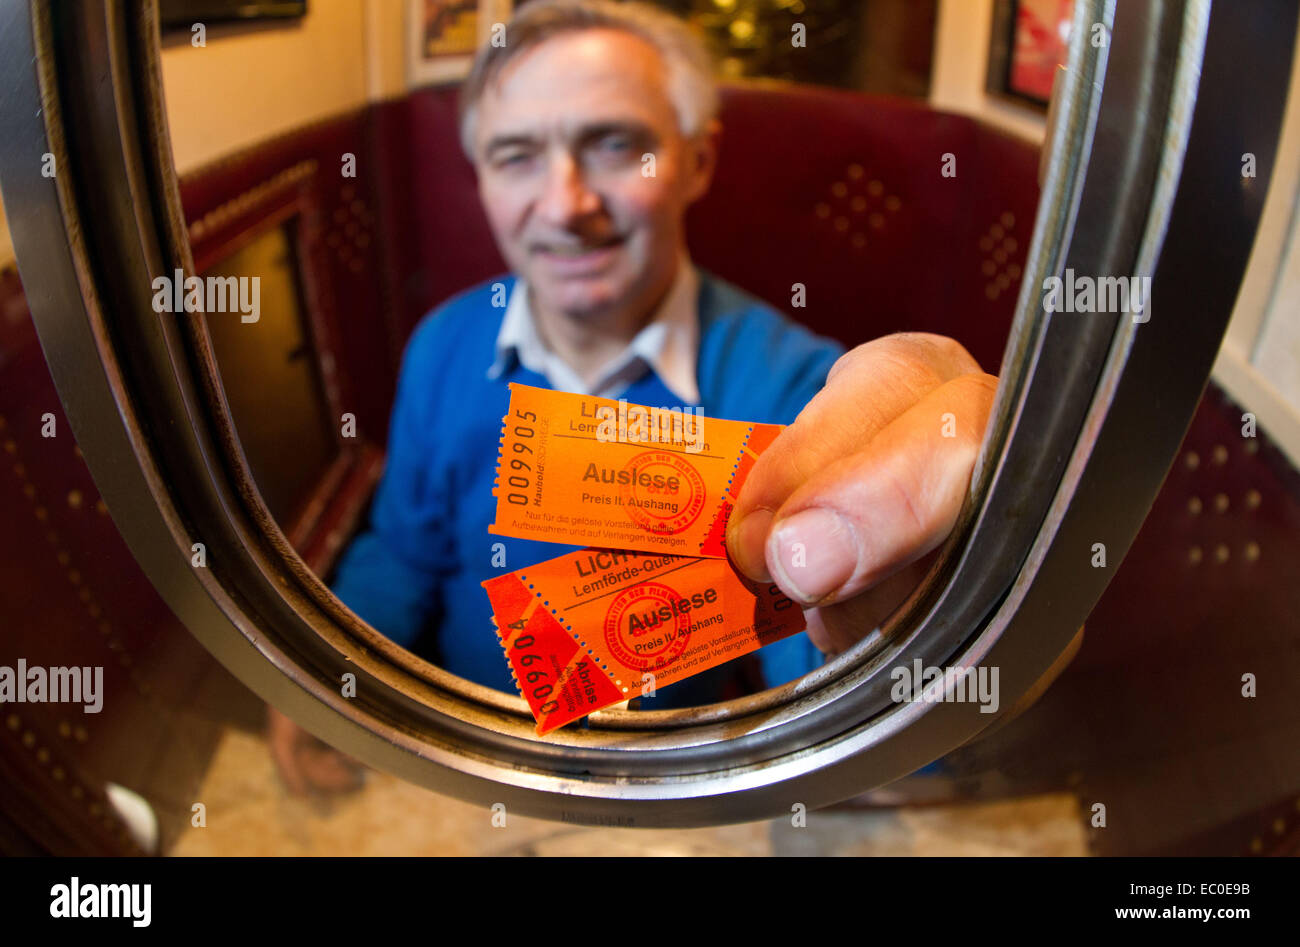 Quernheim, Germany. 28th Nov, 2014. Cinema operator Karl-Heinz Meier sits in his cinema in Quernheim, Germany, 28 November 2014. Meier operates the Lichtburg Kino, the smallest cinema in Germany, according to his report. Photo: FRISO GENTSCH/dpa/Alamy Live News Stock Photo